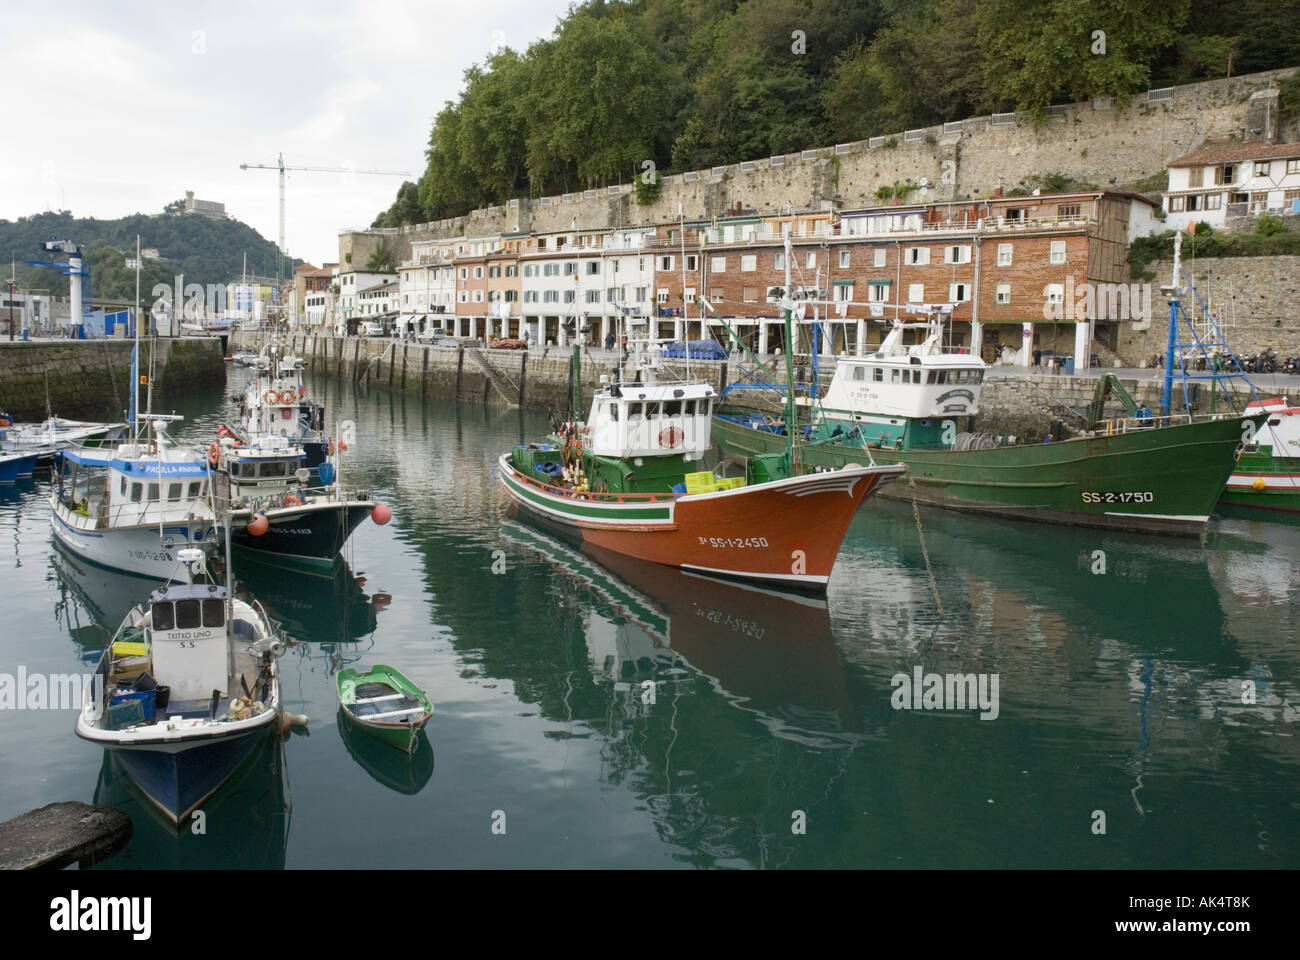 Fishing boats in the stone harbour in San Sebastian's historic Old Town, Spain. Stock Photo